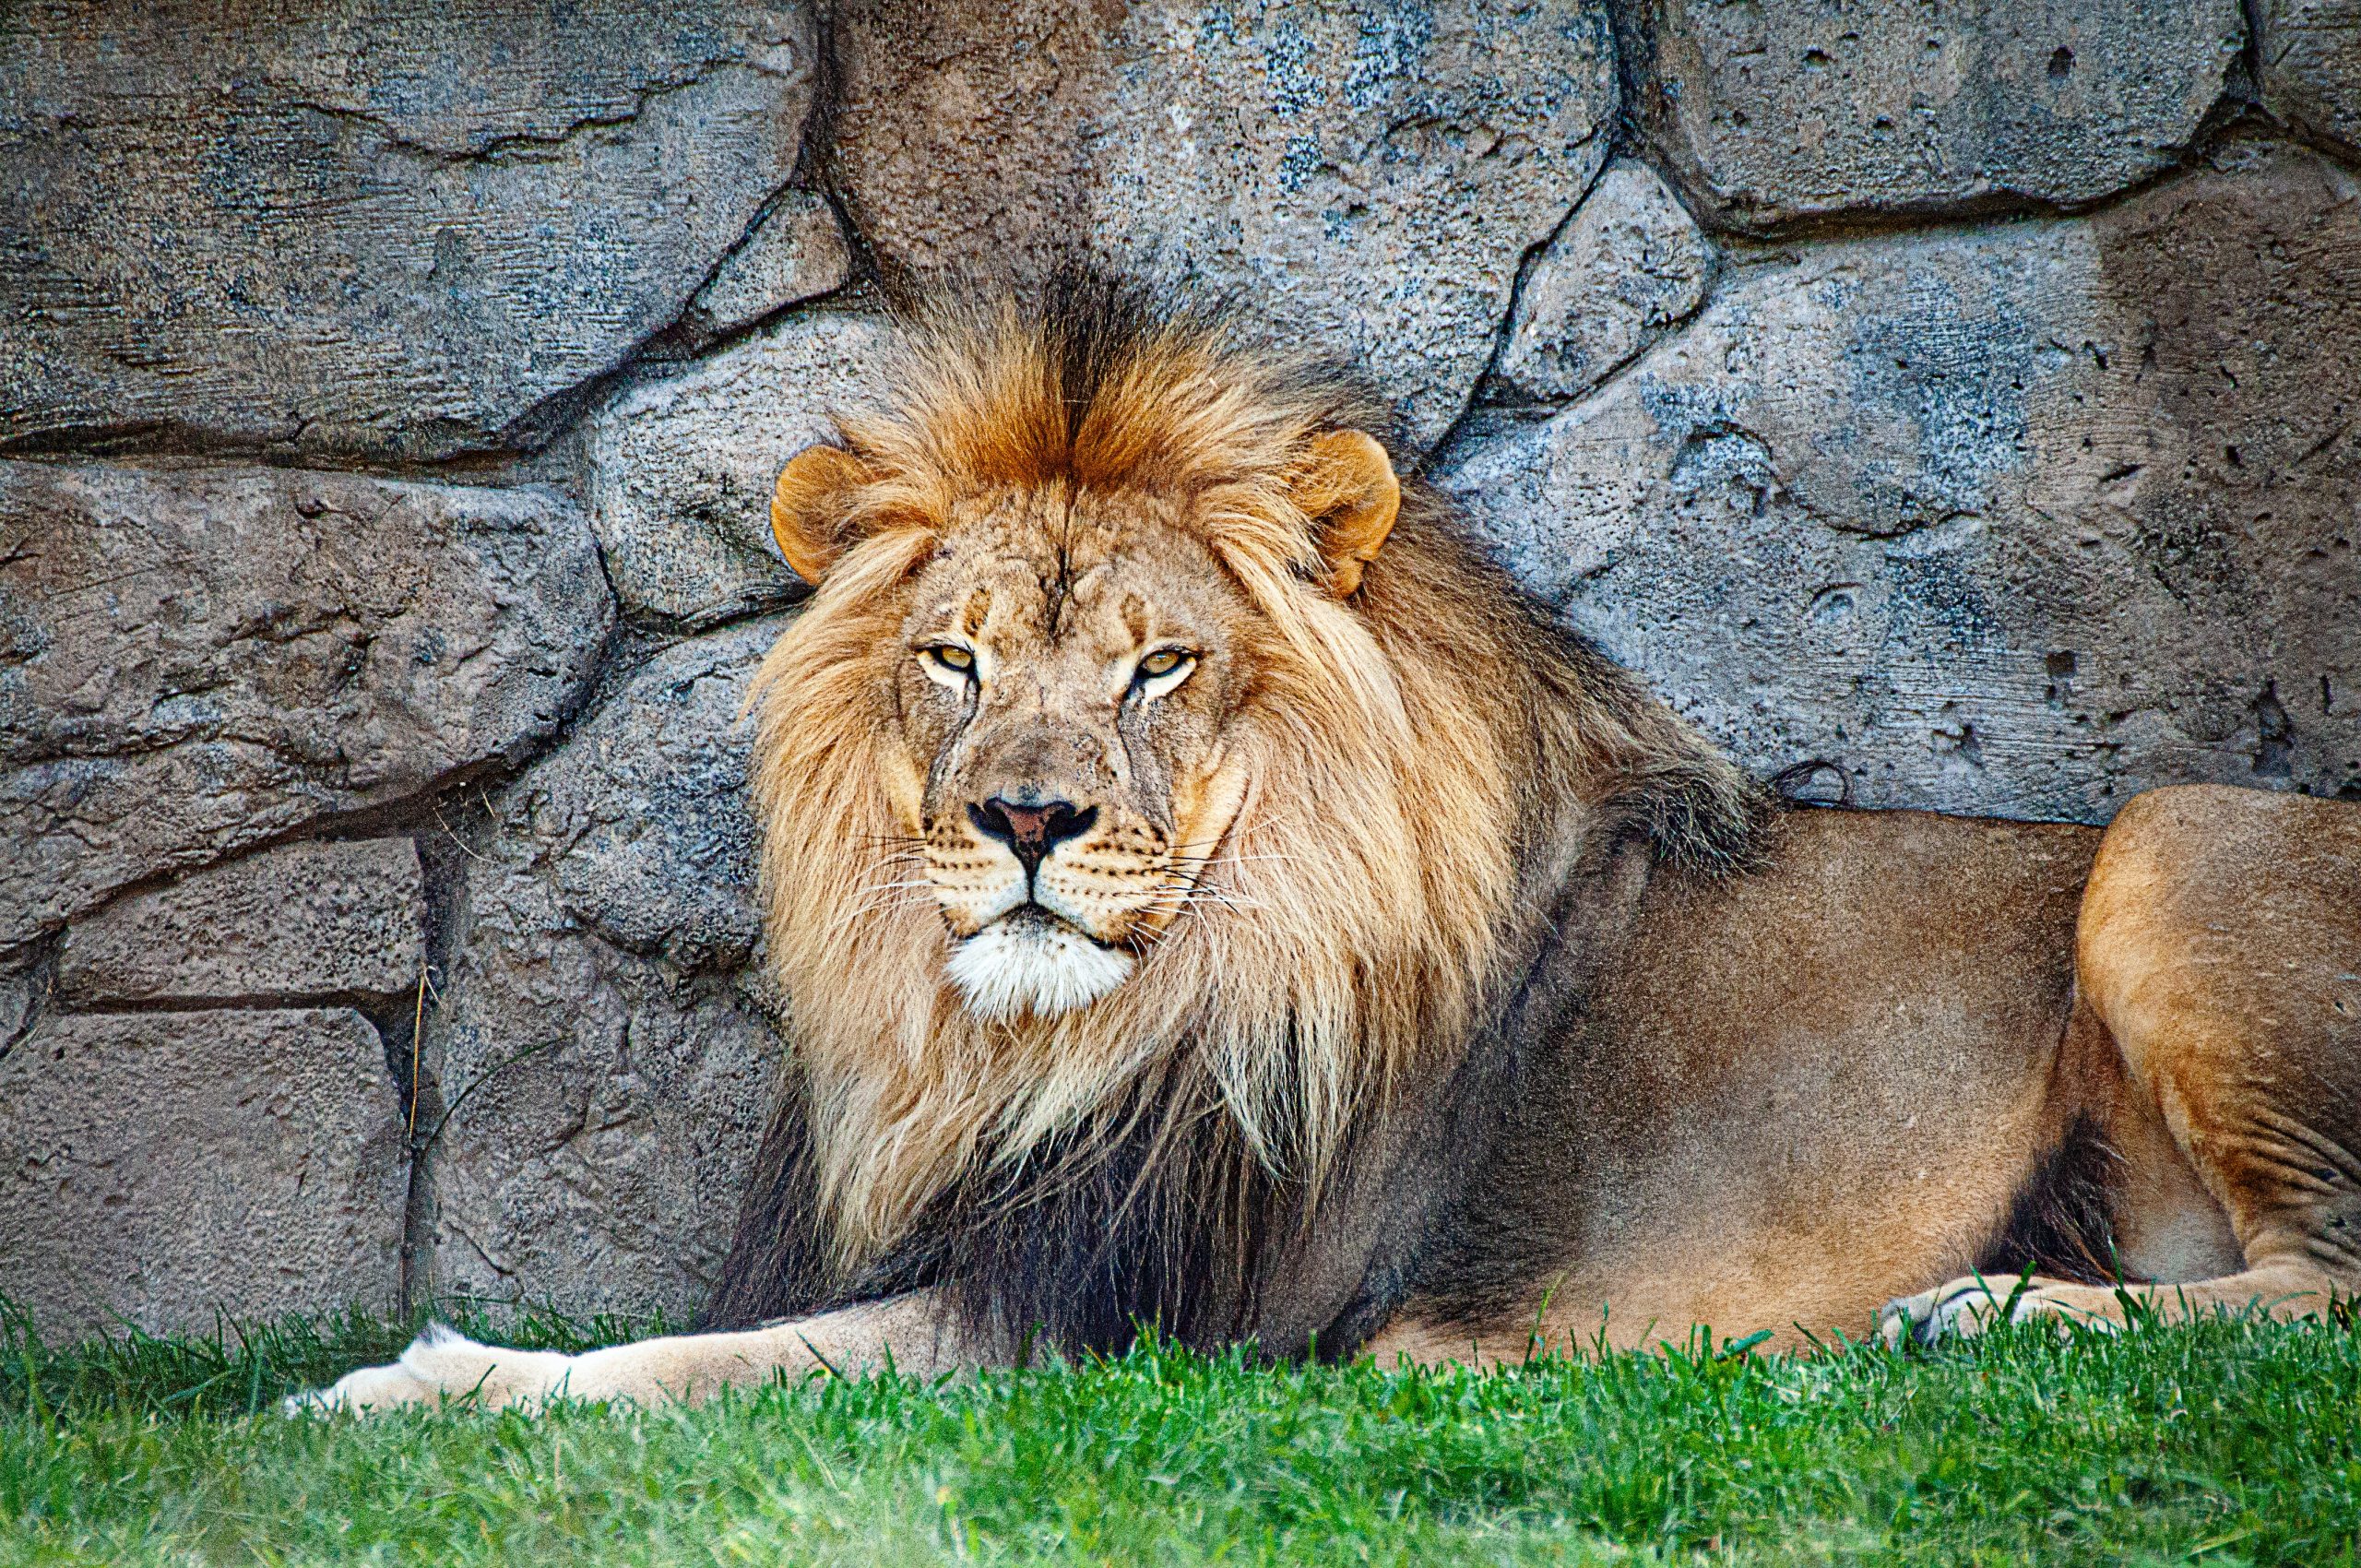 Which countrys national animal is the majestic lion scaled